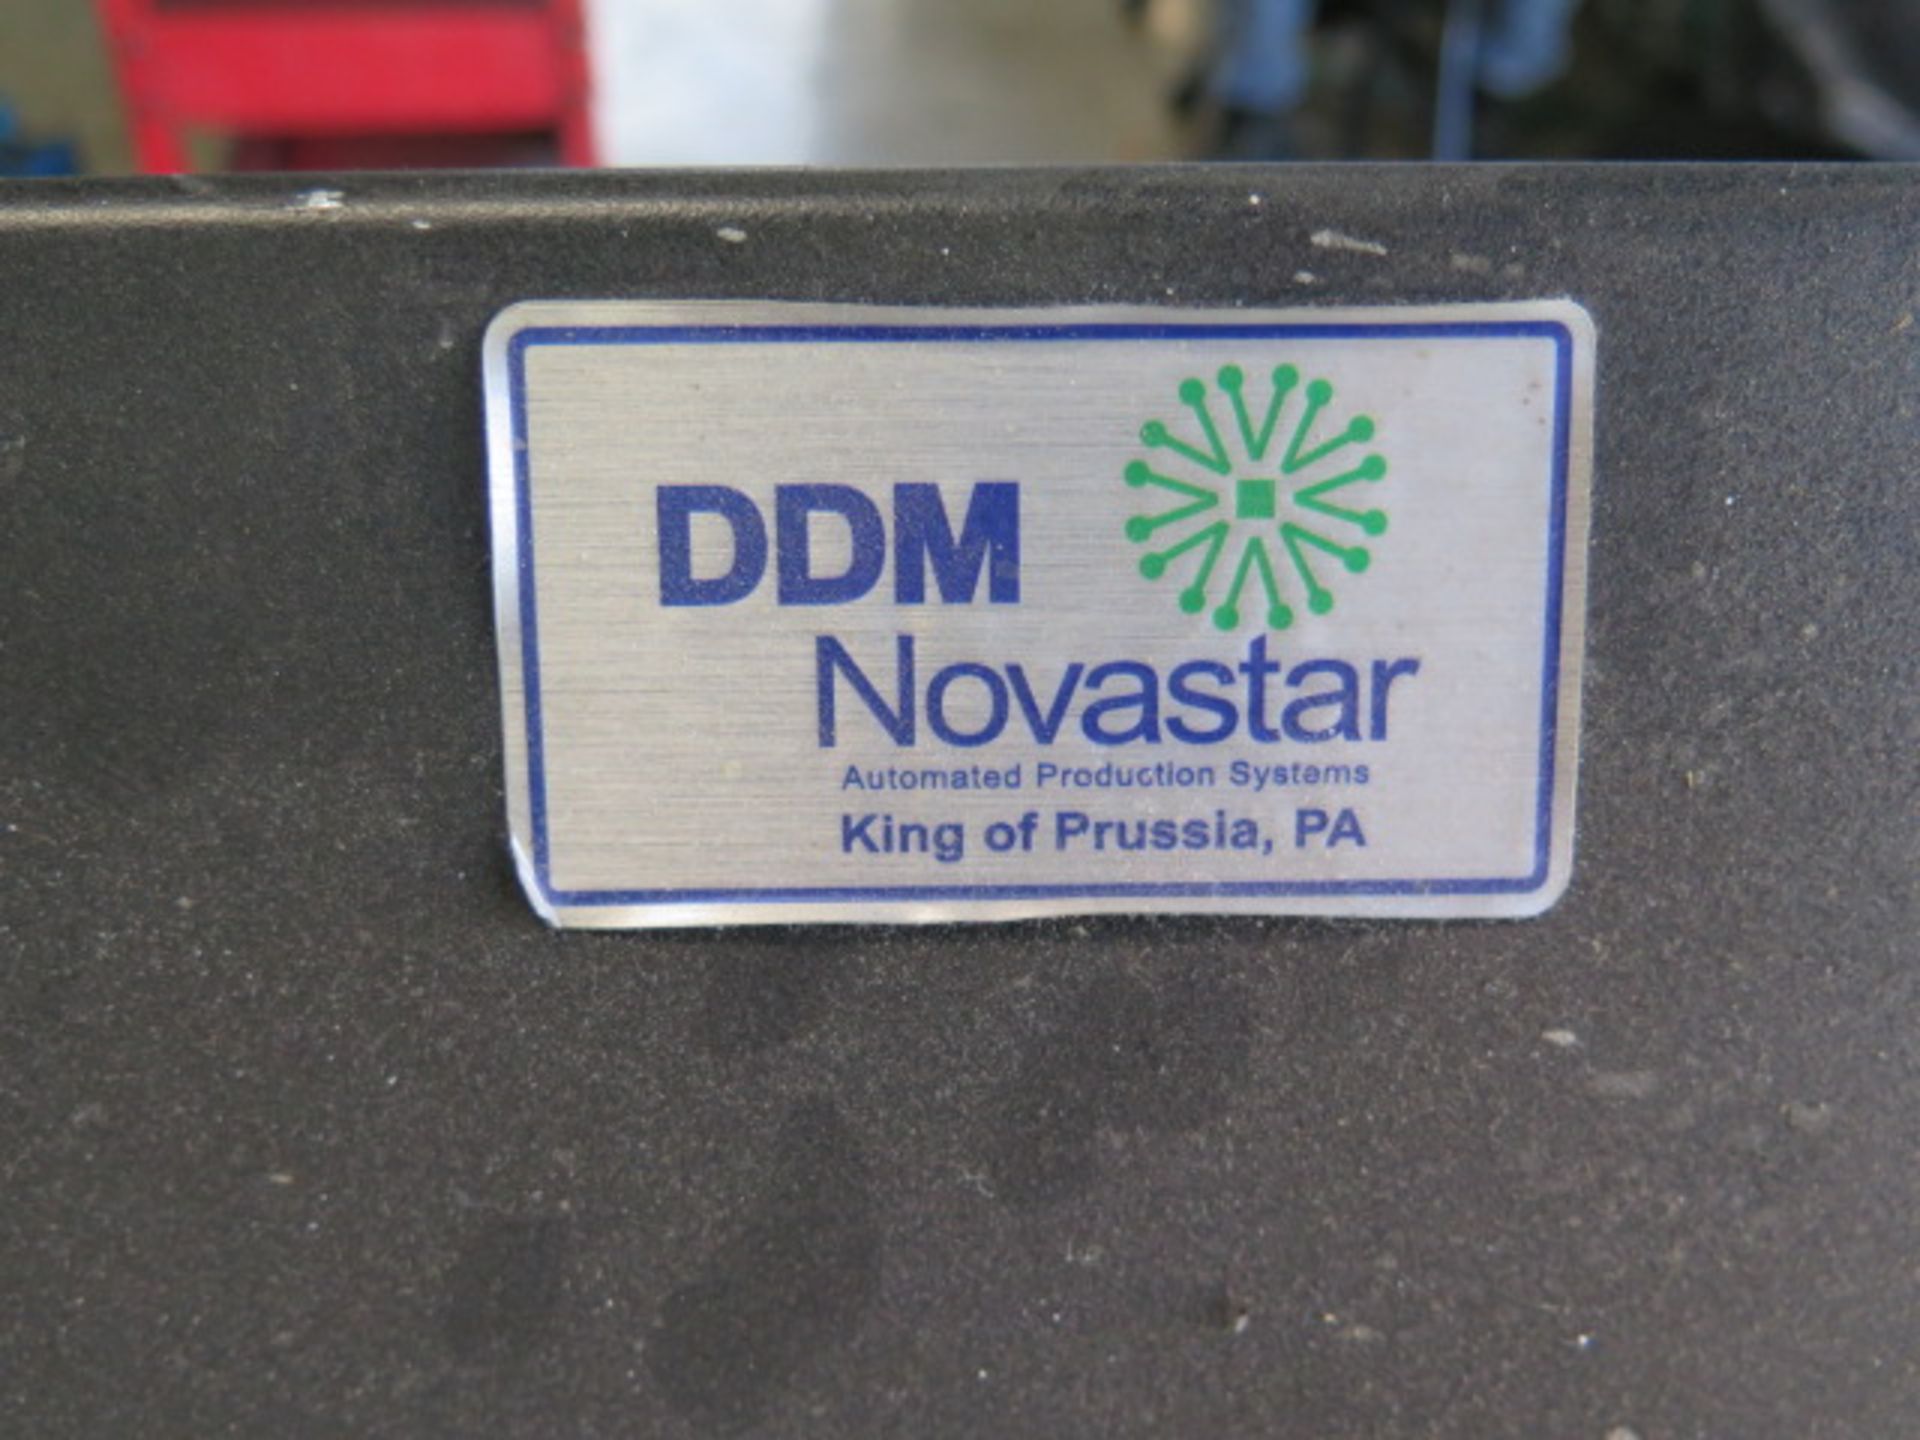 DDM Novastar "Gold Print" mdl. SPR-20 Screen and Stencil Printers (3) (SOLD AS-IS - NO WARRANTY) - Image 3 of 8